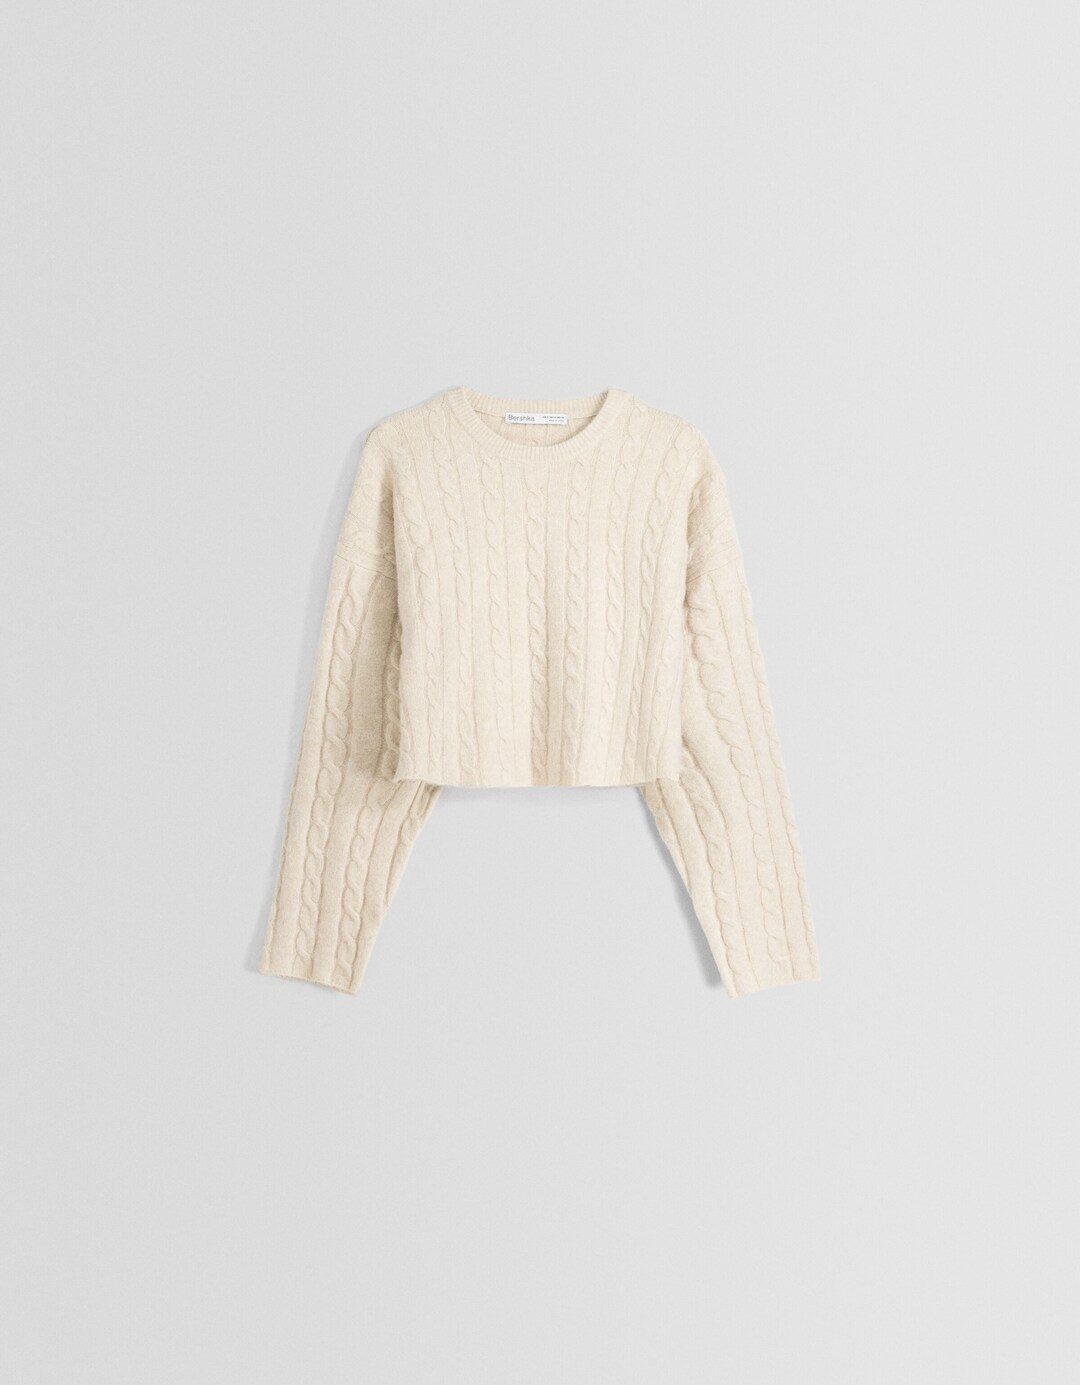 Boxy fit high neck sweater